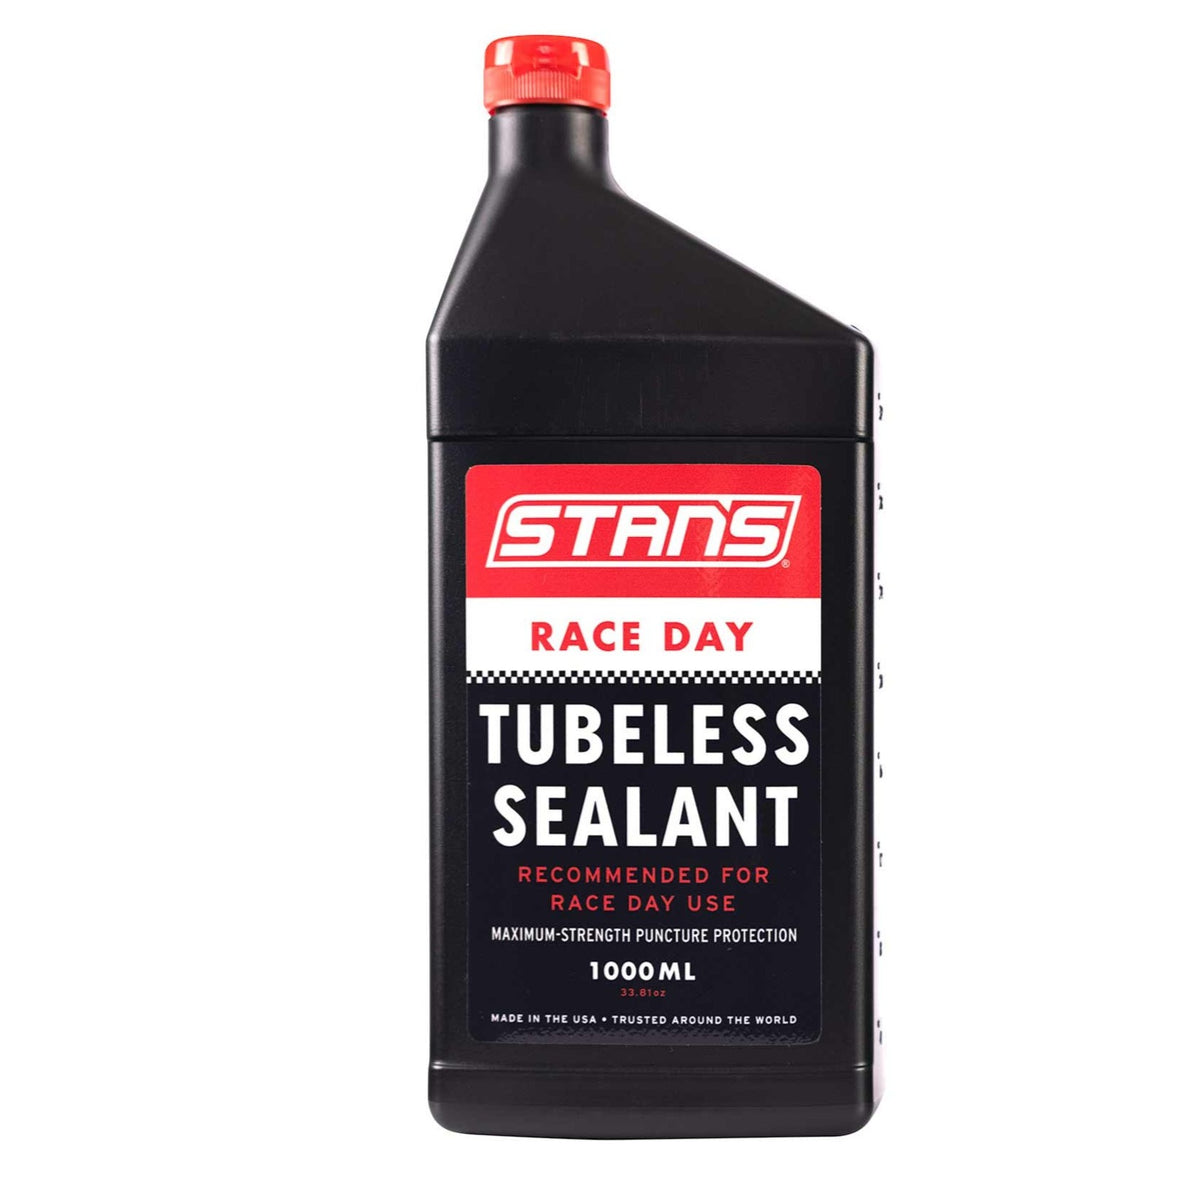 Stans Race Day Tubeless Sealant 1000ml